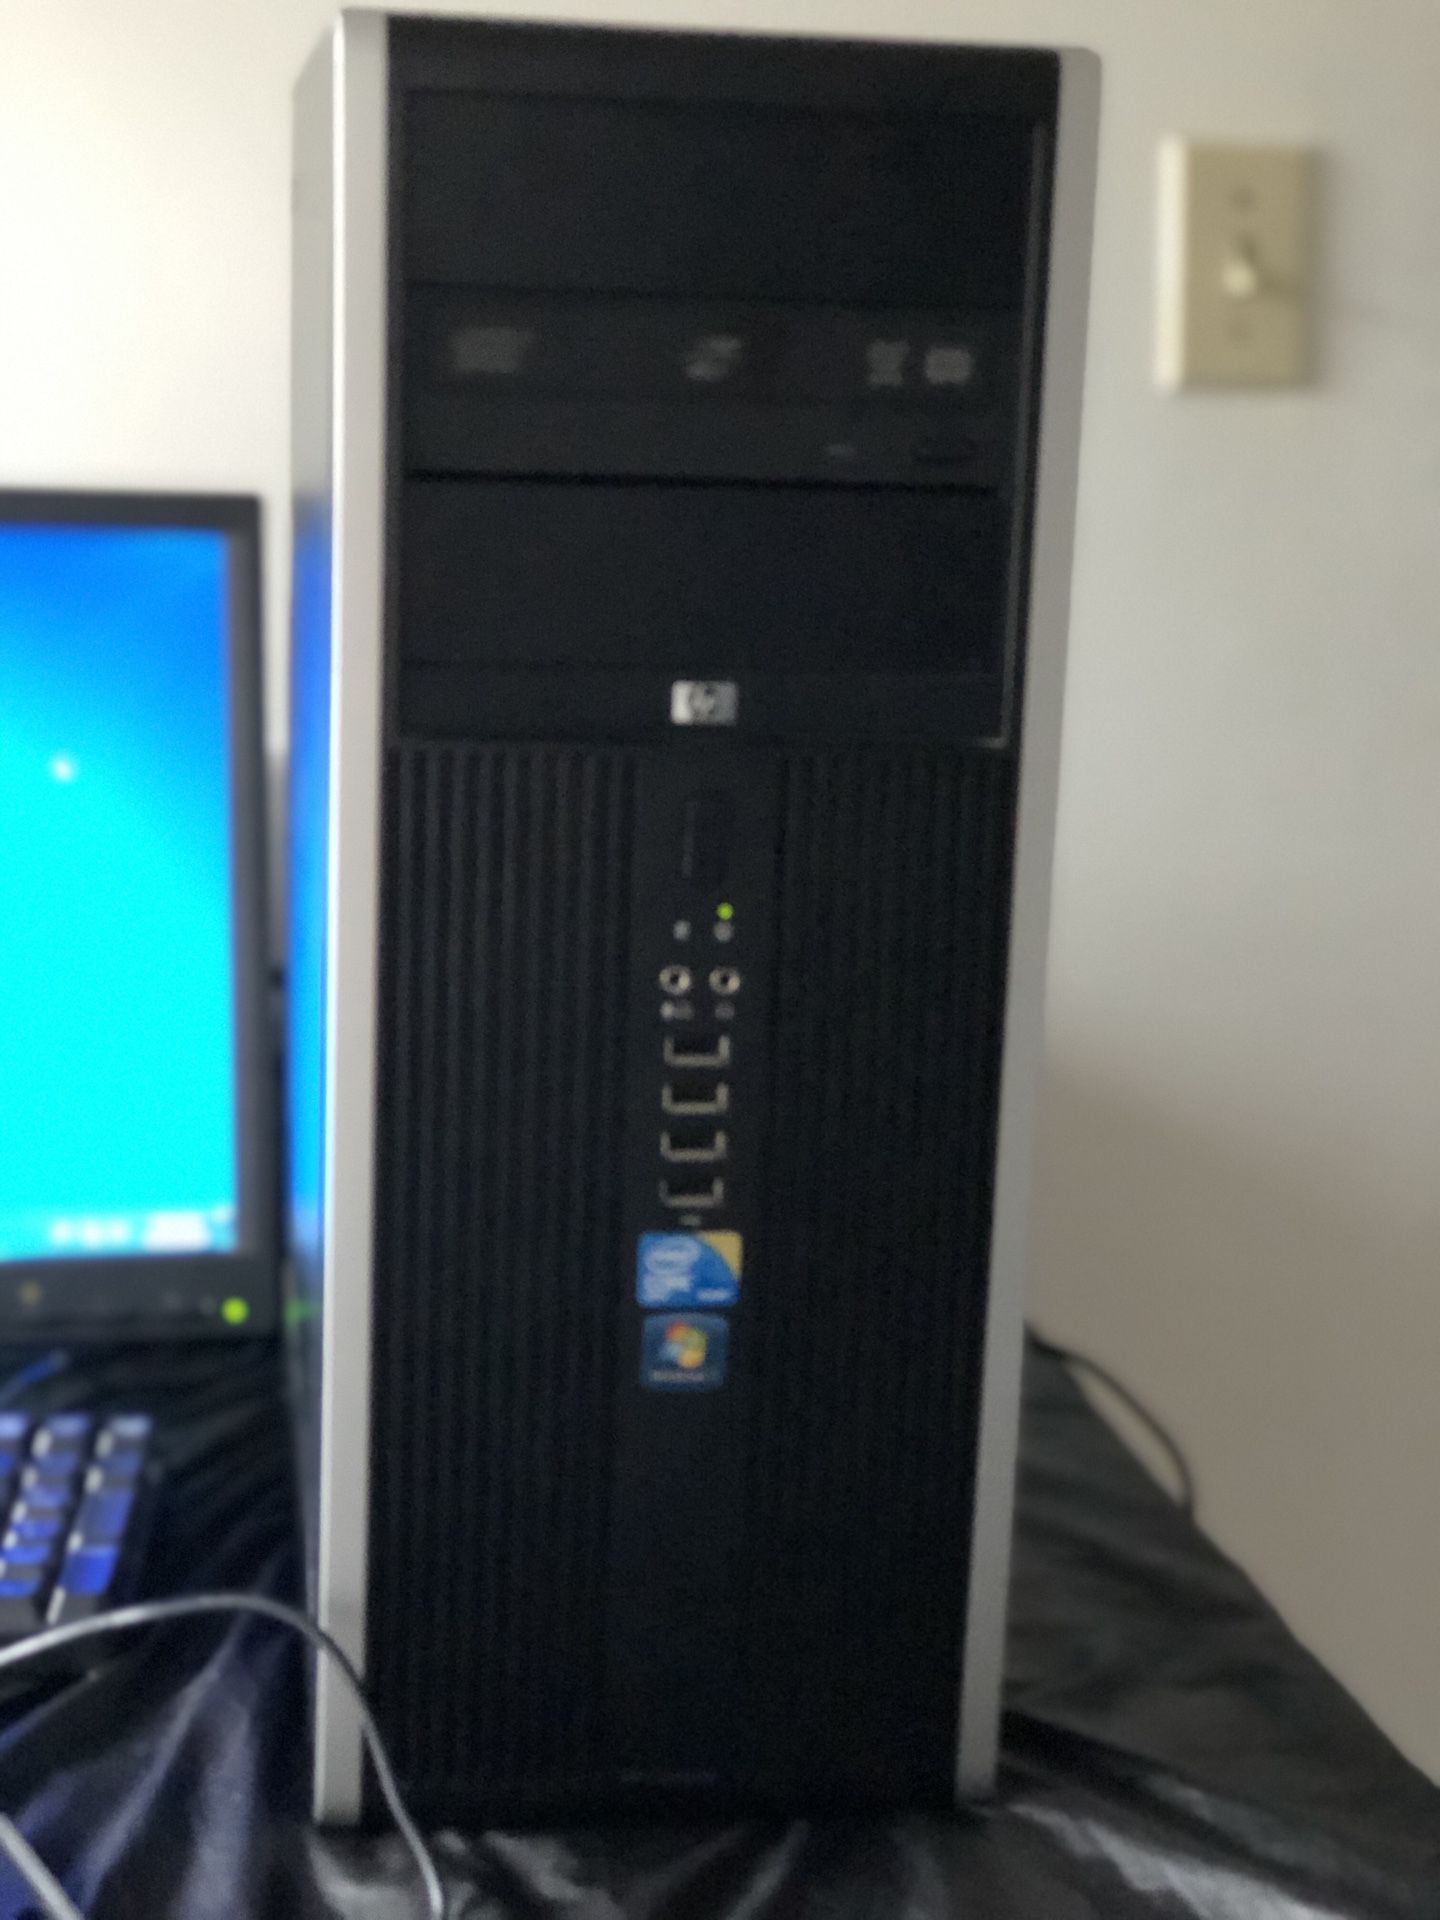 Hp pc computer with monitor